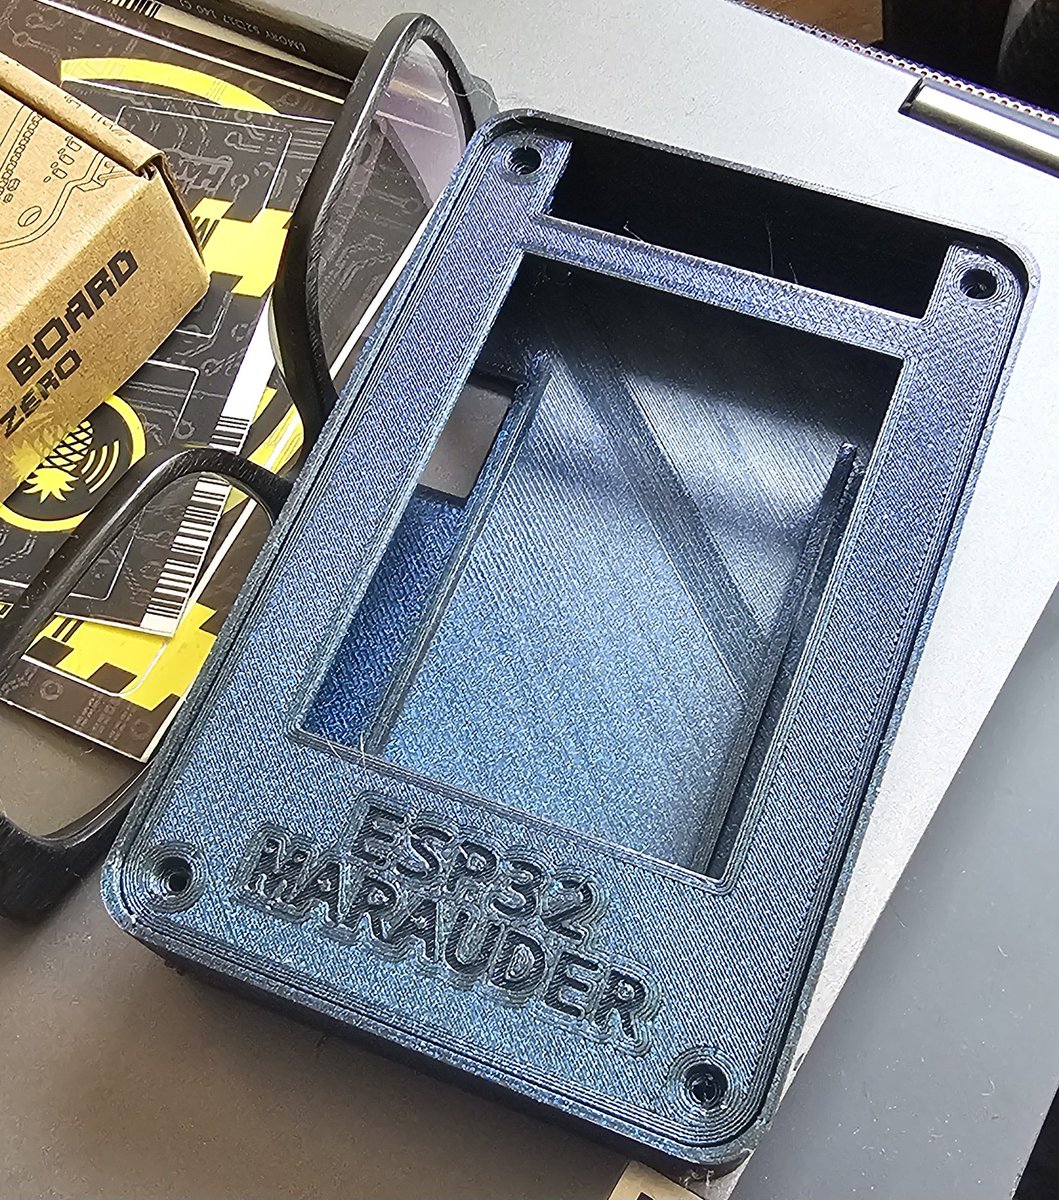 Well... Almost perfect... 😂 🤓 🛠 🖨

#3dprinters #3dprintinglife #3dprint #3dprinting #3dprinted #3dprinter #3dprintlife #3dprintlifestyle #fijpi #creality #ender3pro #klipper #esp32 #esp32project #marauder #esp32marauder #pentesting #pentest #infosecurity #cybersecurity